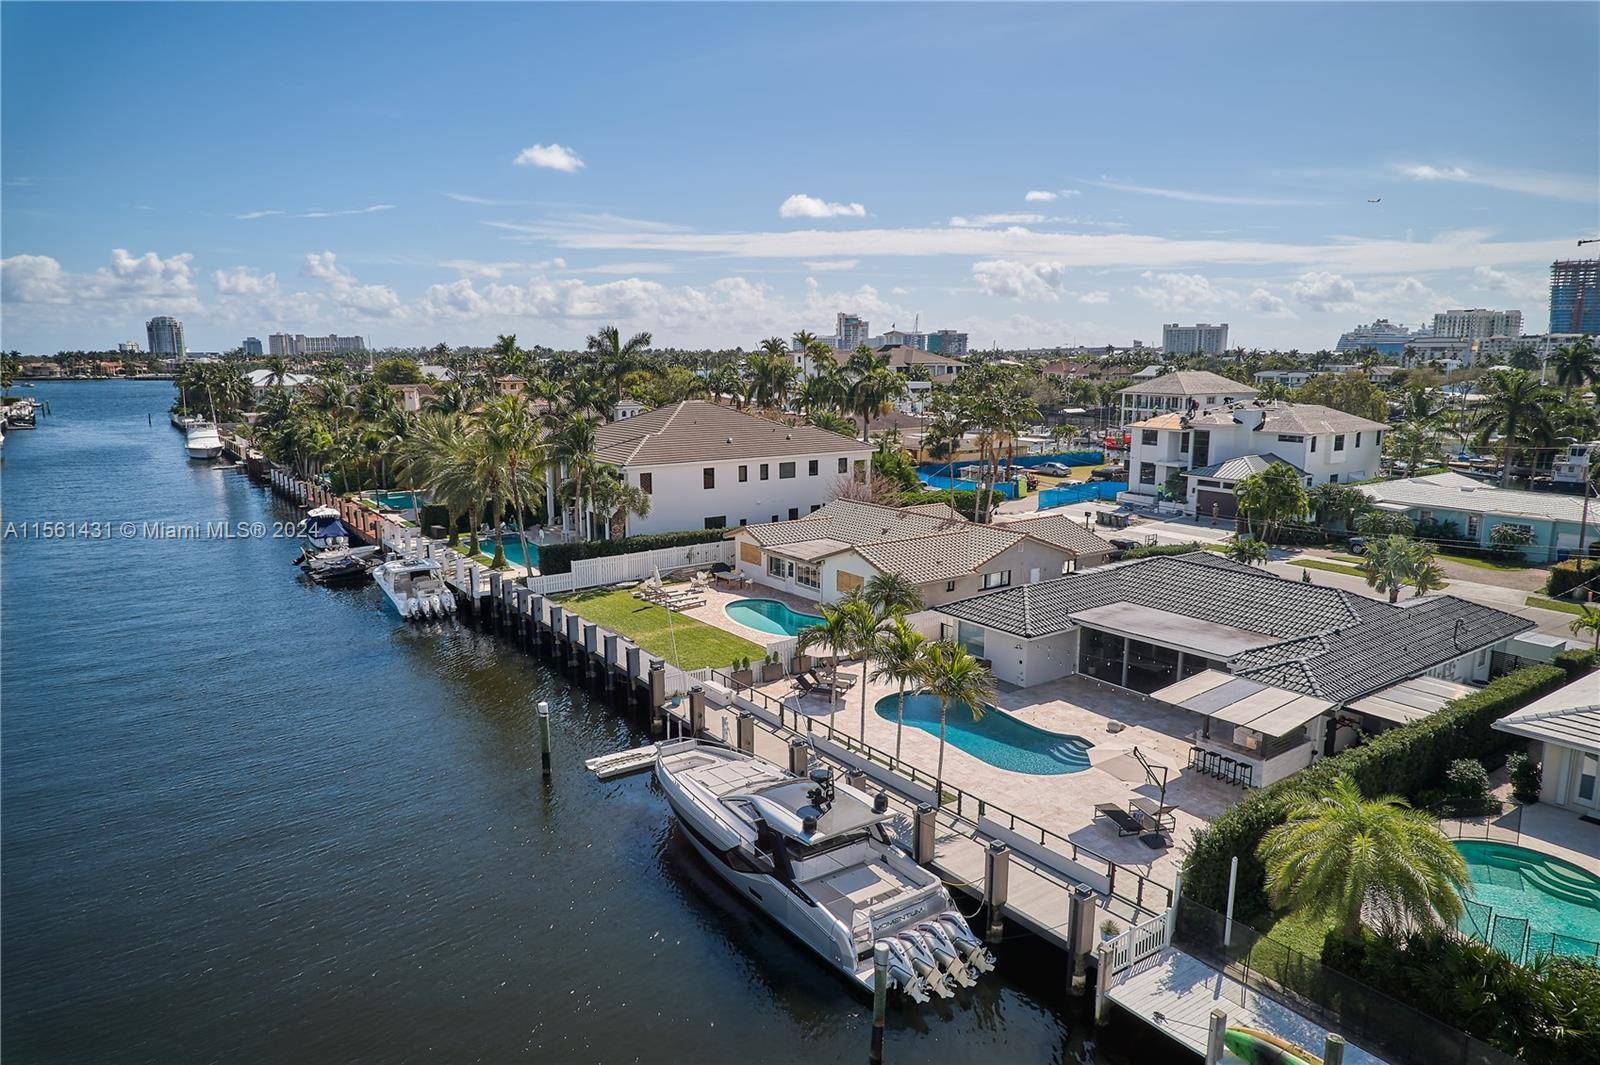 Located along the prestigious Rio Vista Blvd, this stunning property embodies contemporary sophistication amidst the serene backdrop of the New River Boardwalk.